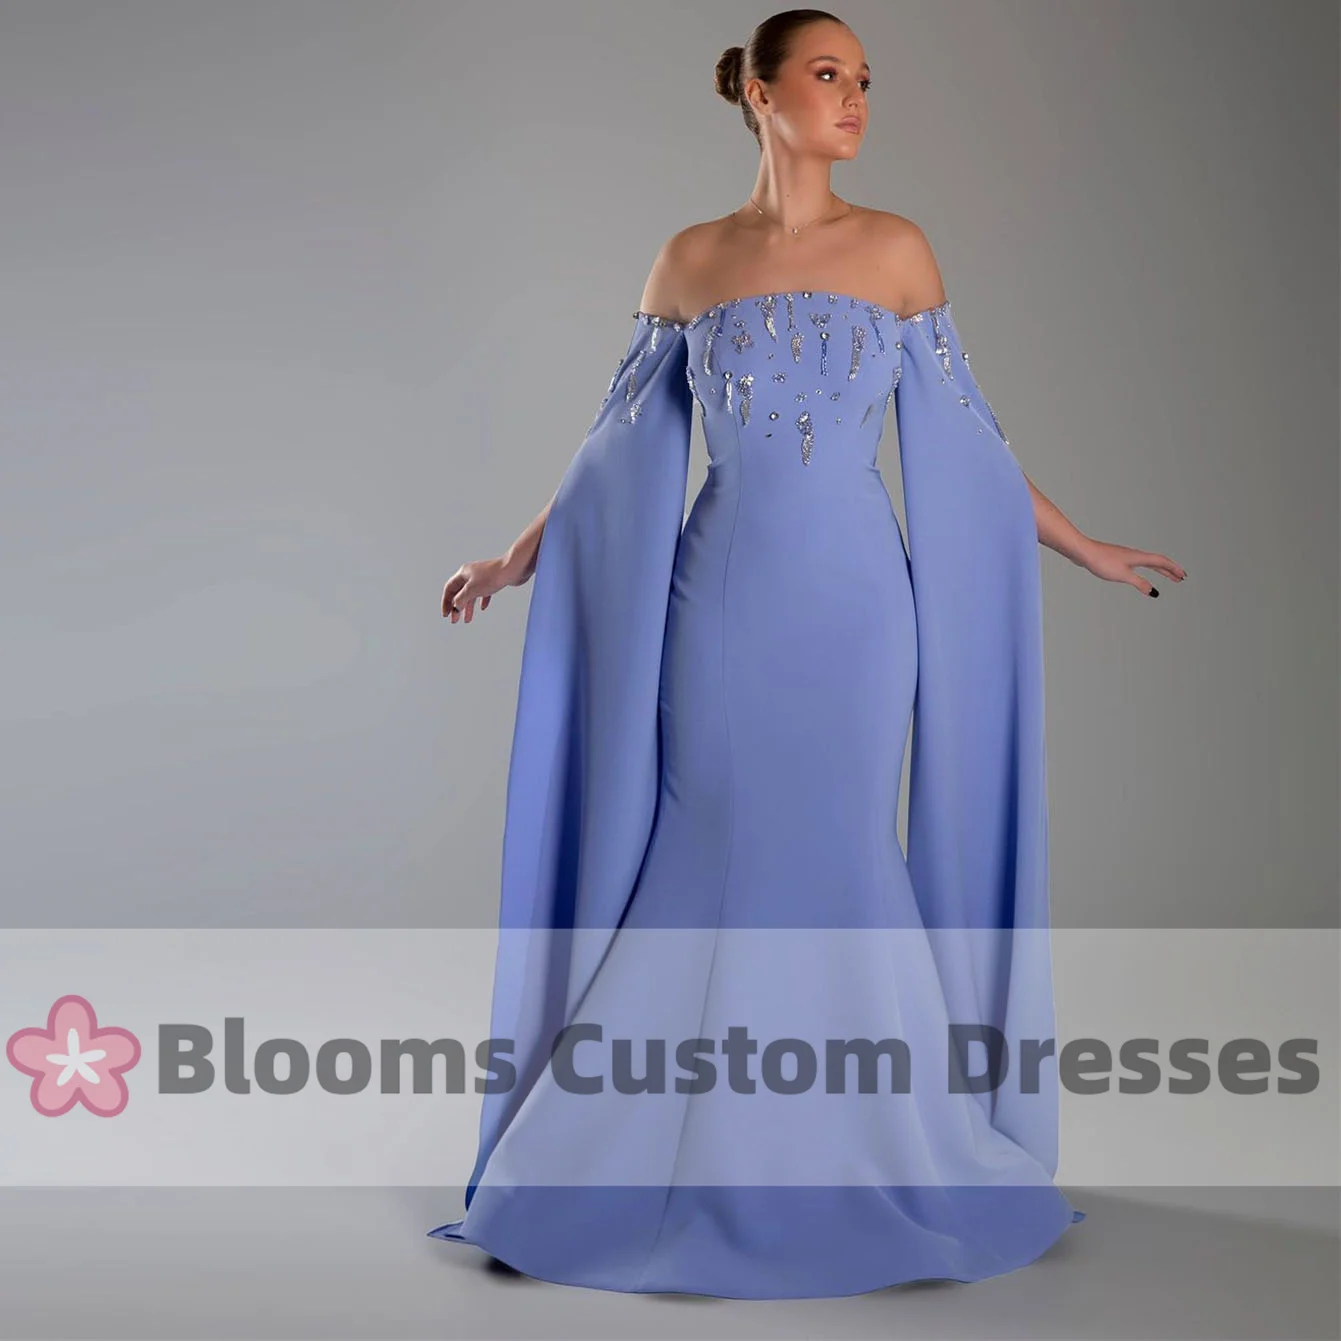 

Blooms Gorgeous Off Shoulder Beaded Long Evening Dresses Mermaid Long Slit Sleeves Prom Dress Wedding Formal Occasion Gown